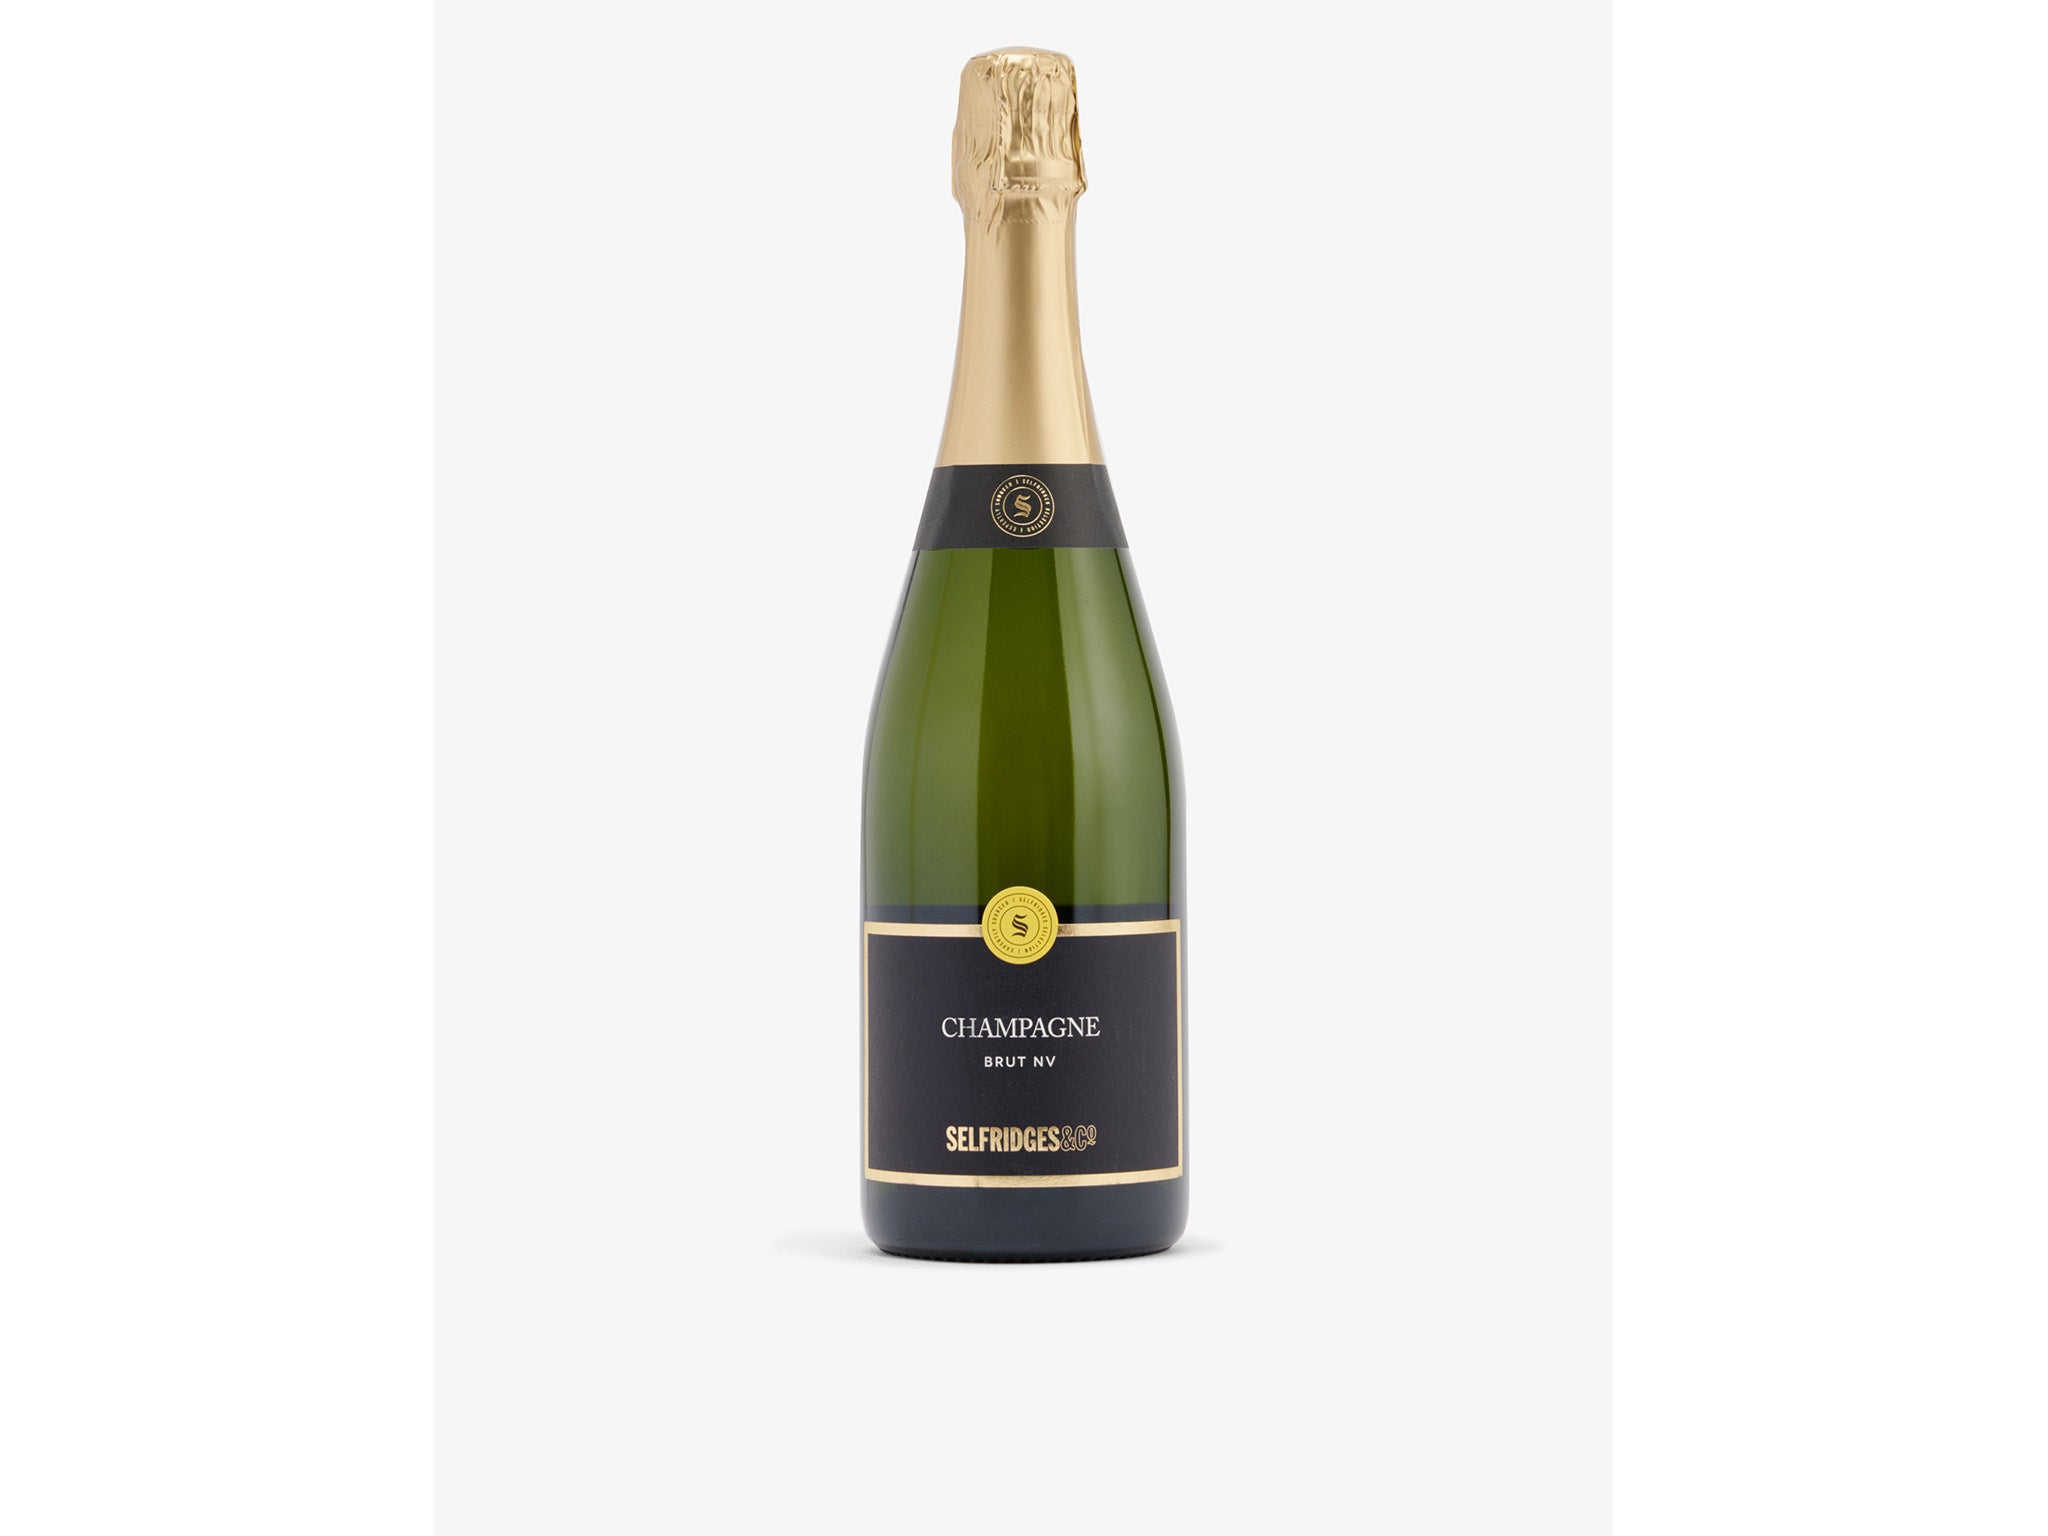 Selfridges selection champagne review